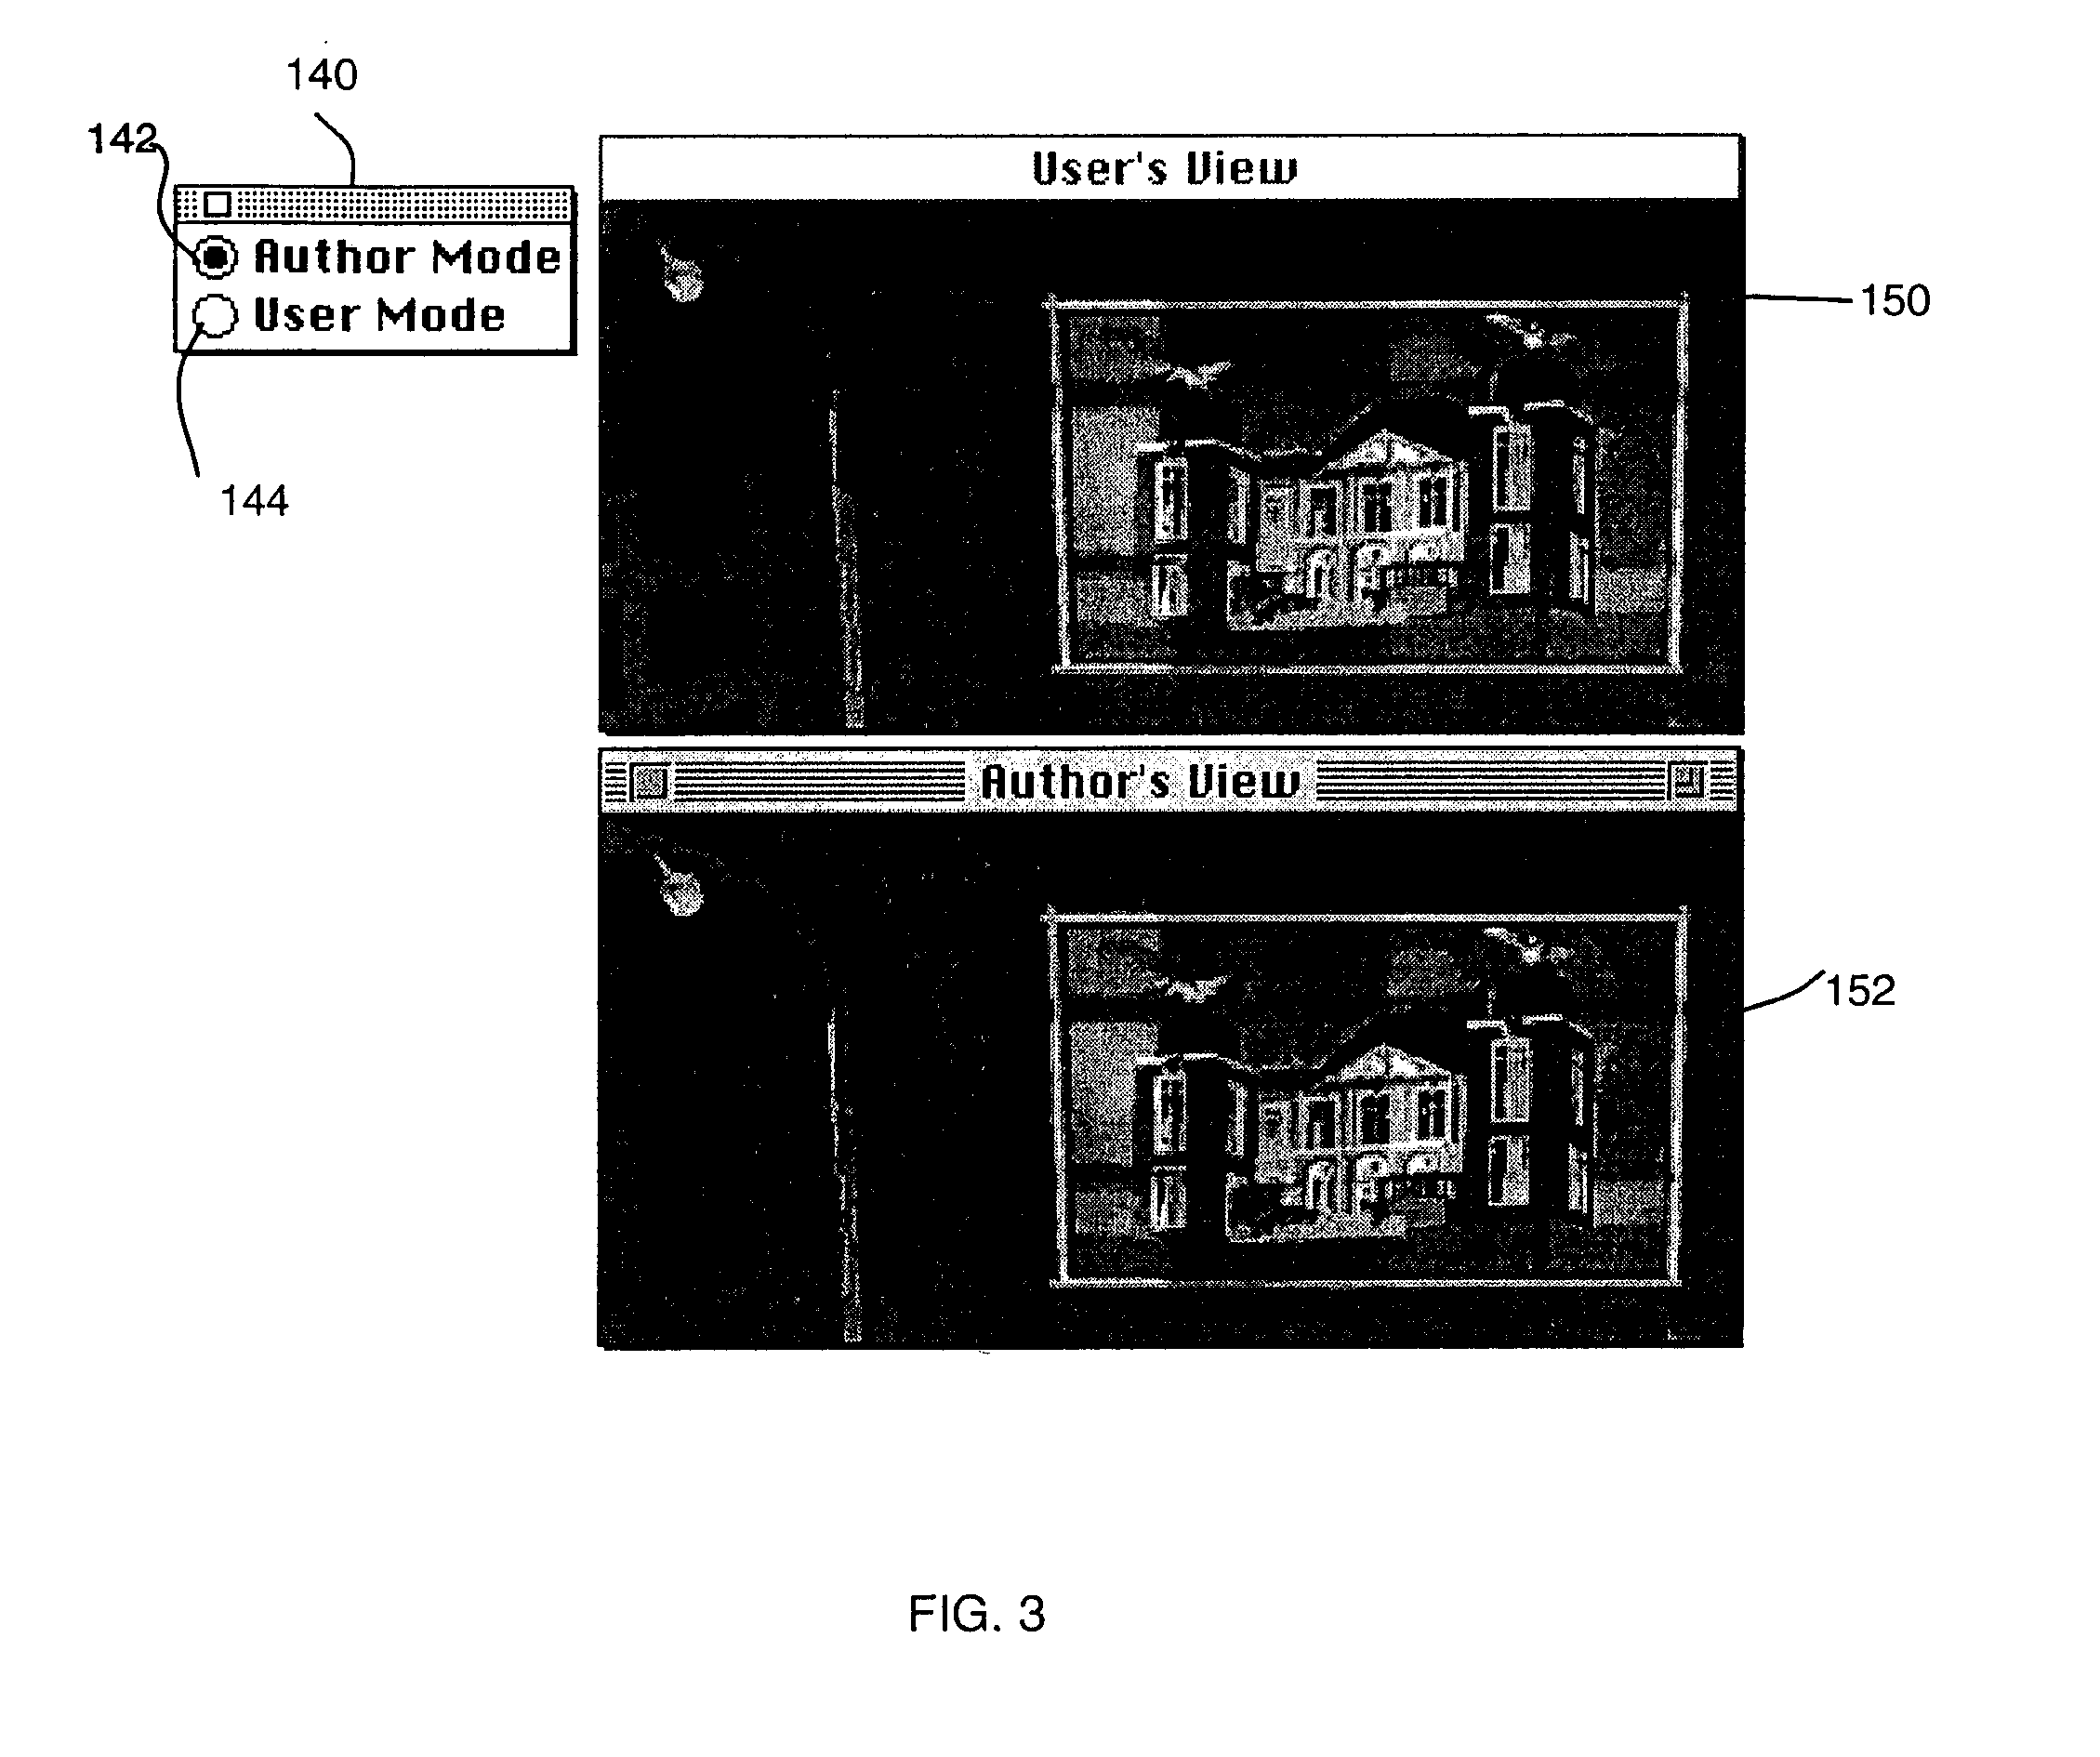 Method and apparatus for storing and replaying creation history of multimedia software or other software content